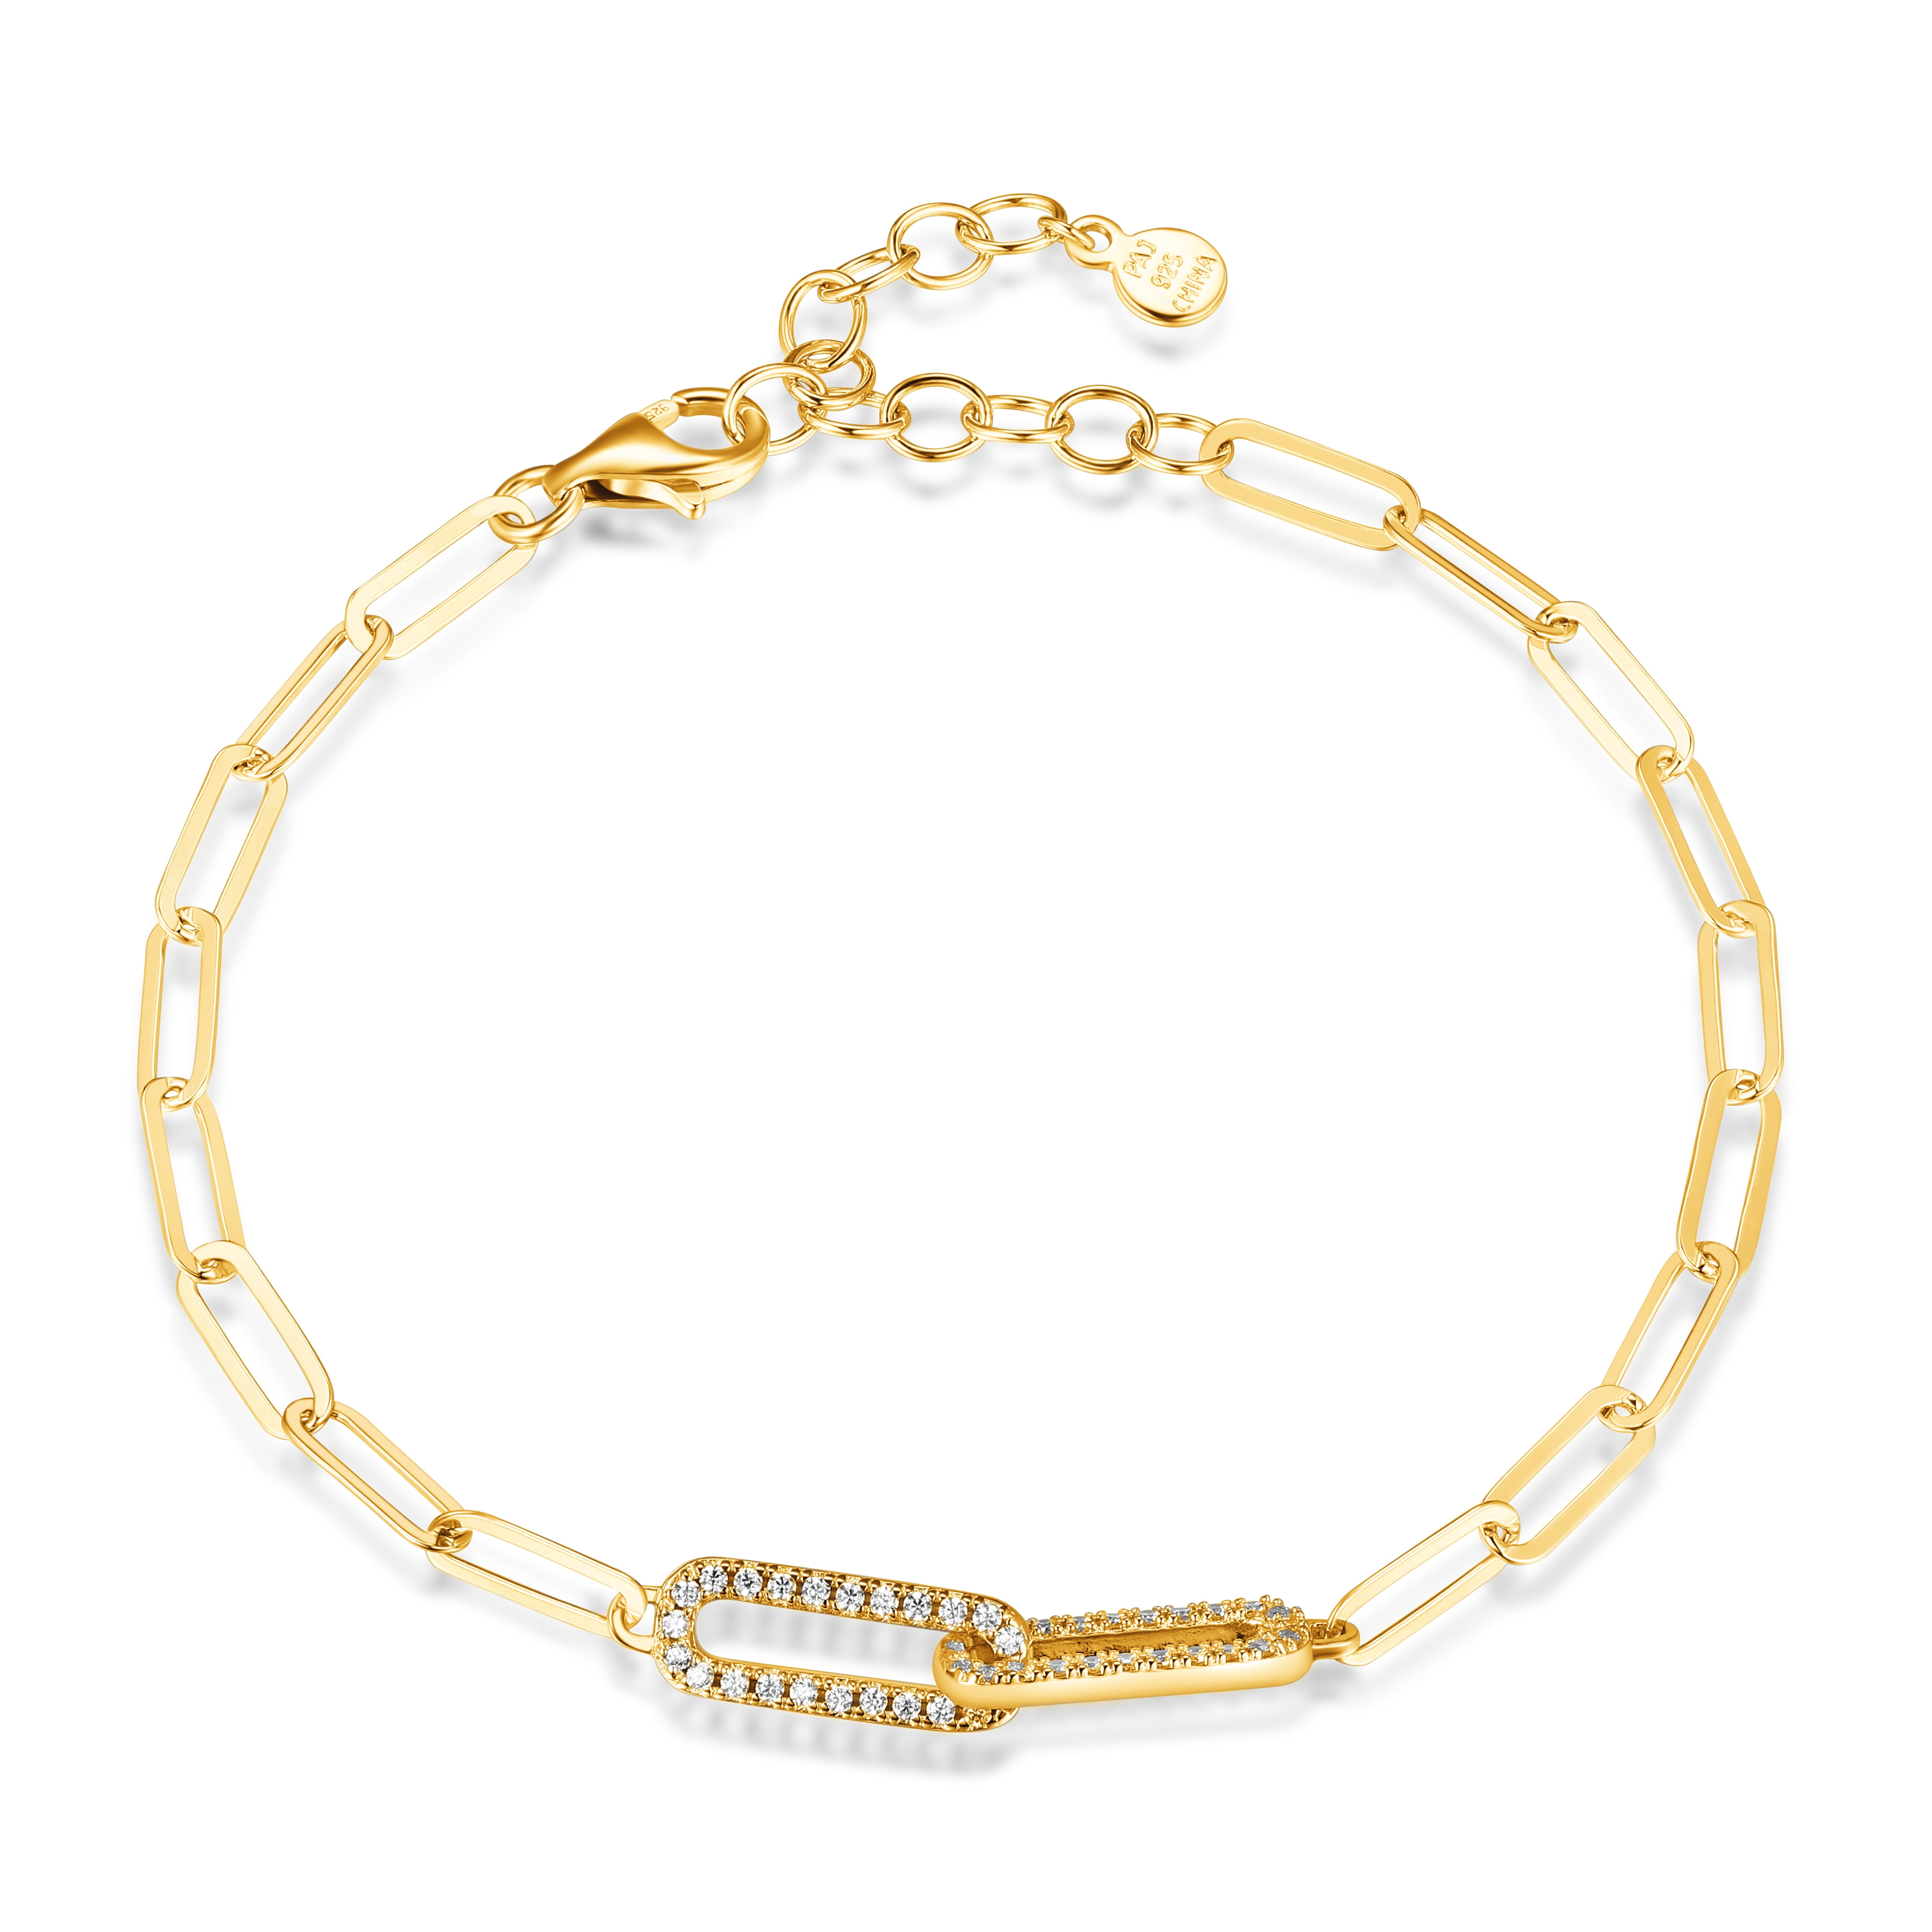 Chunky Paperclip Chain Bracelet in Gold and Silver - Mixed Metals Charm  Bracelet with Sparkle Faceting